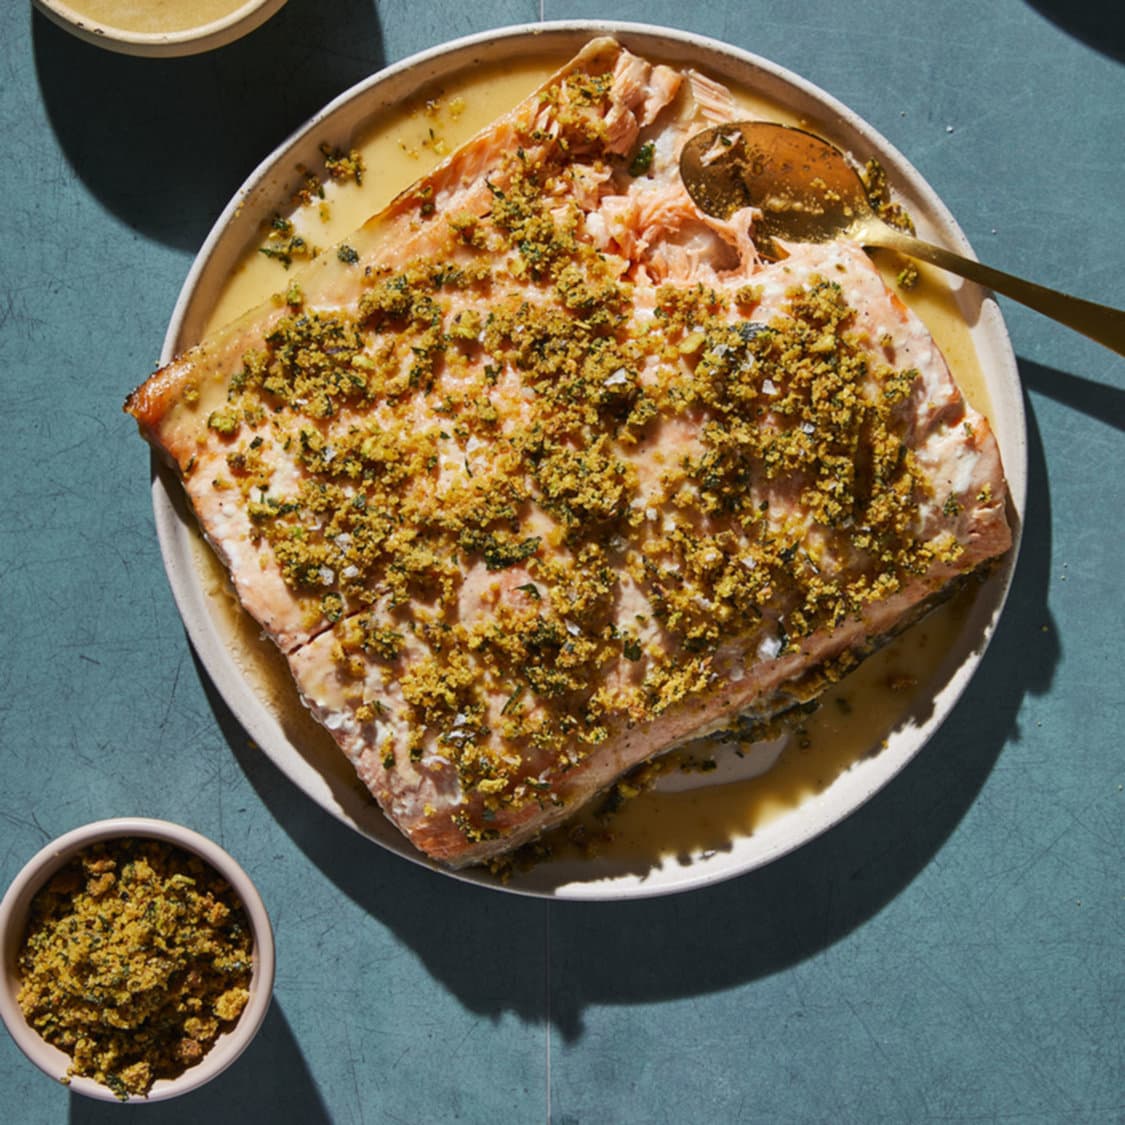 https://fleishigs.com/images/mobile-app/recipes/1521-list-honey-roasted-salmon-with-savory-pistachio-crumble.jpg